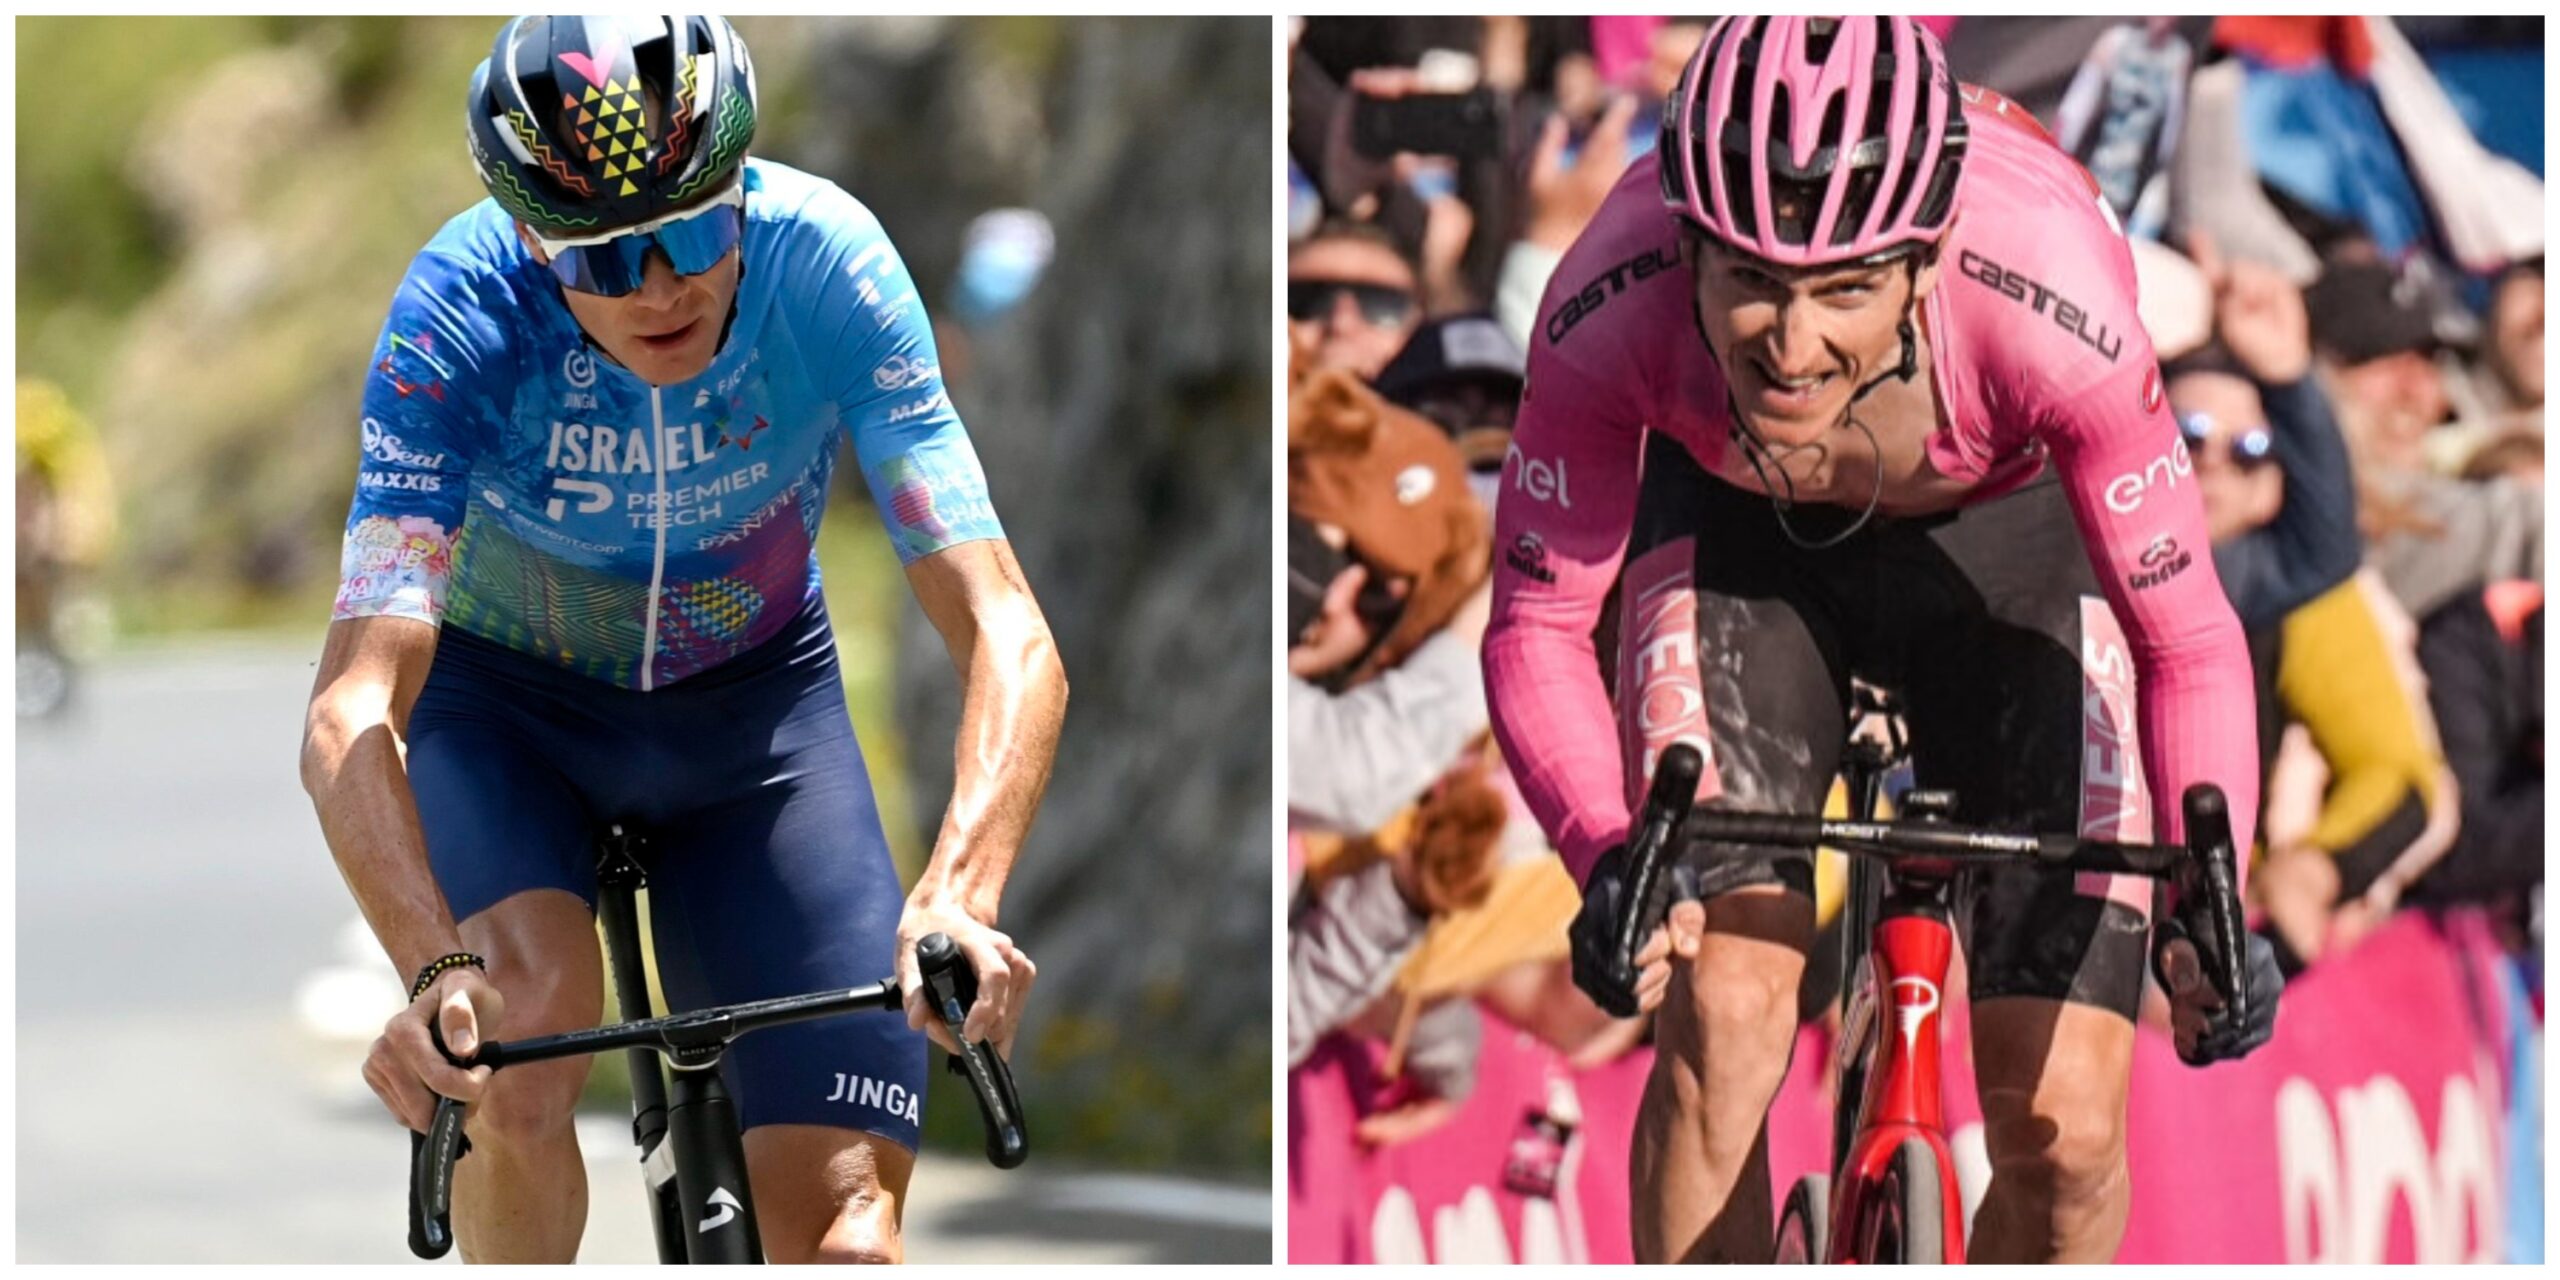 Geraint Thomas says Chris Froome “stuck in 2010s” with “deluded” optimism for last win